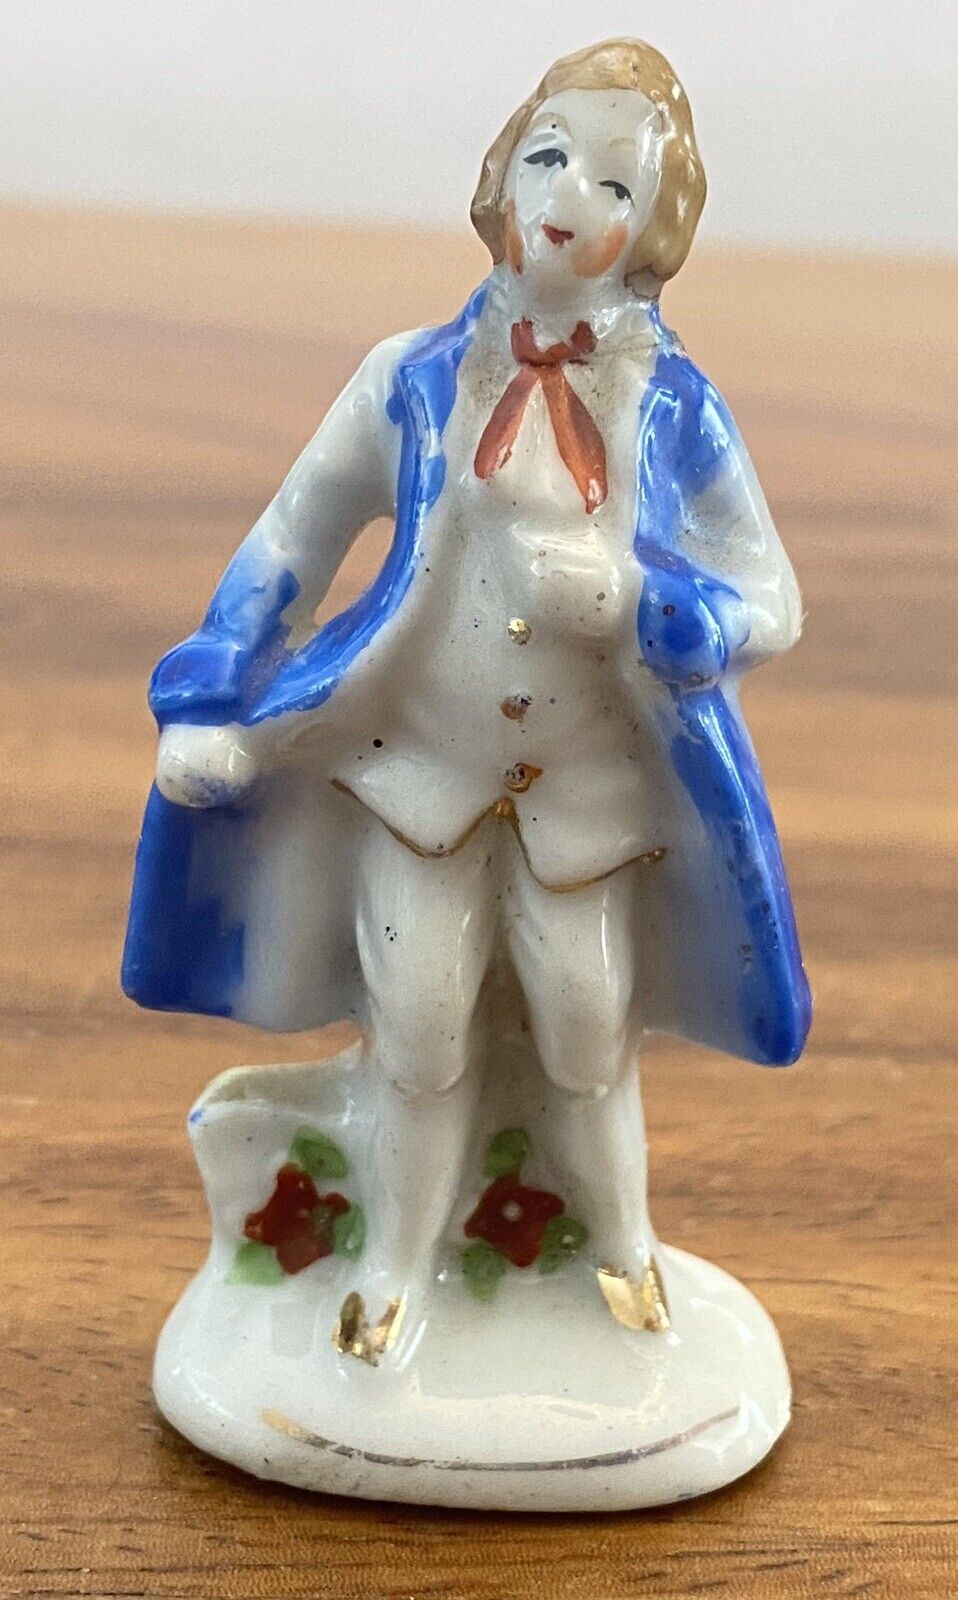 Pico Made in Occupied Japan Miniature Ceramic Porcelain Colonial Man.